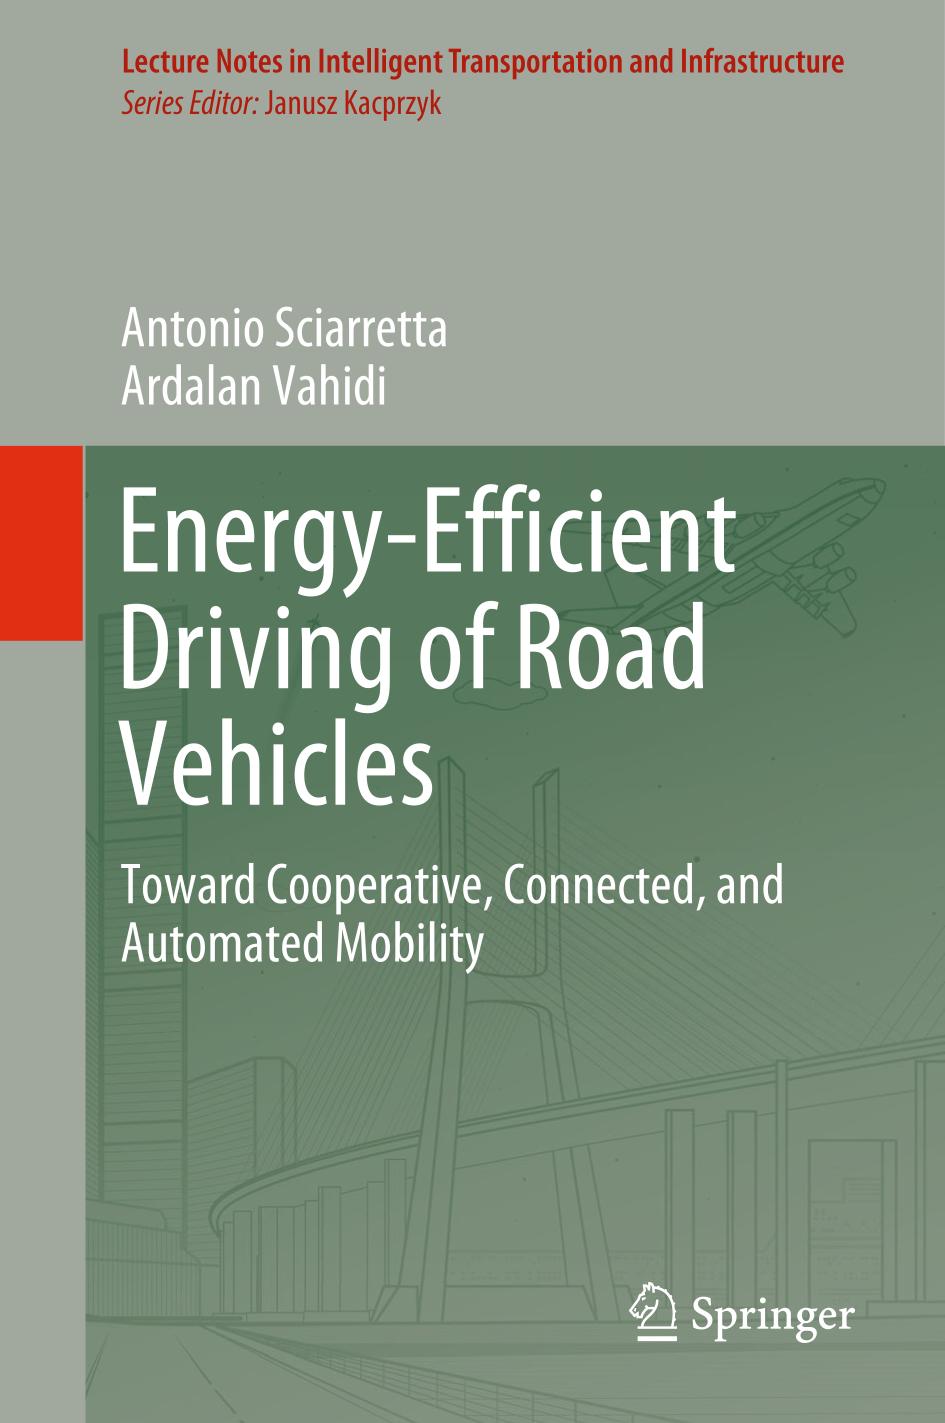 Energy-efficient driving of road vehicles : toward cooperative, connected, and automated mobility